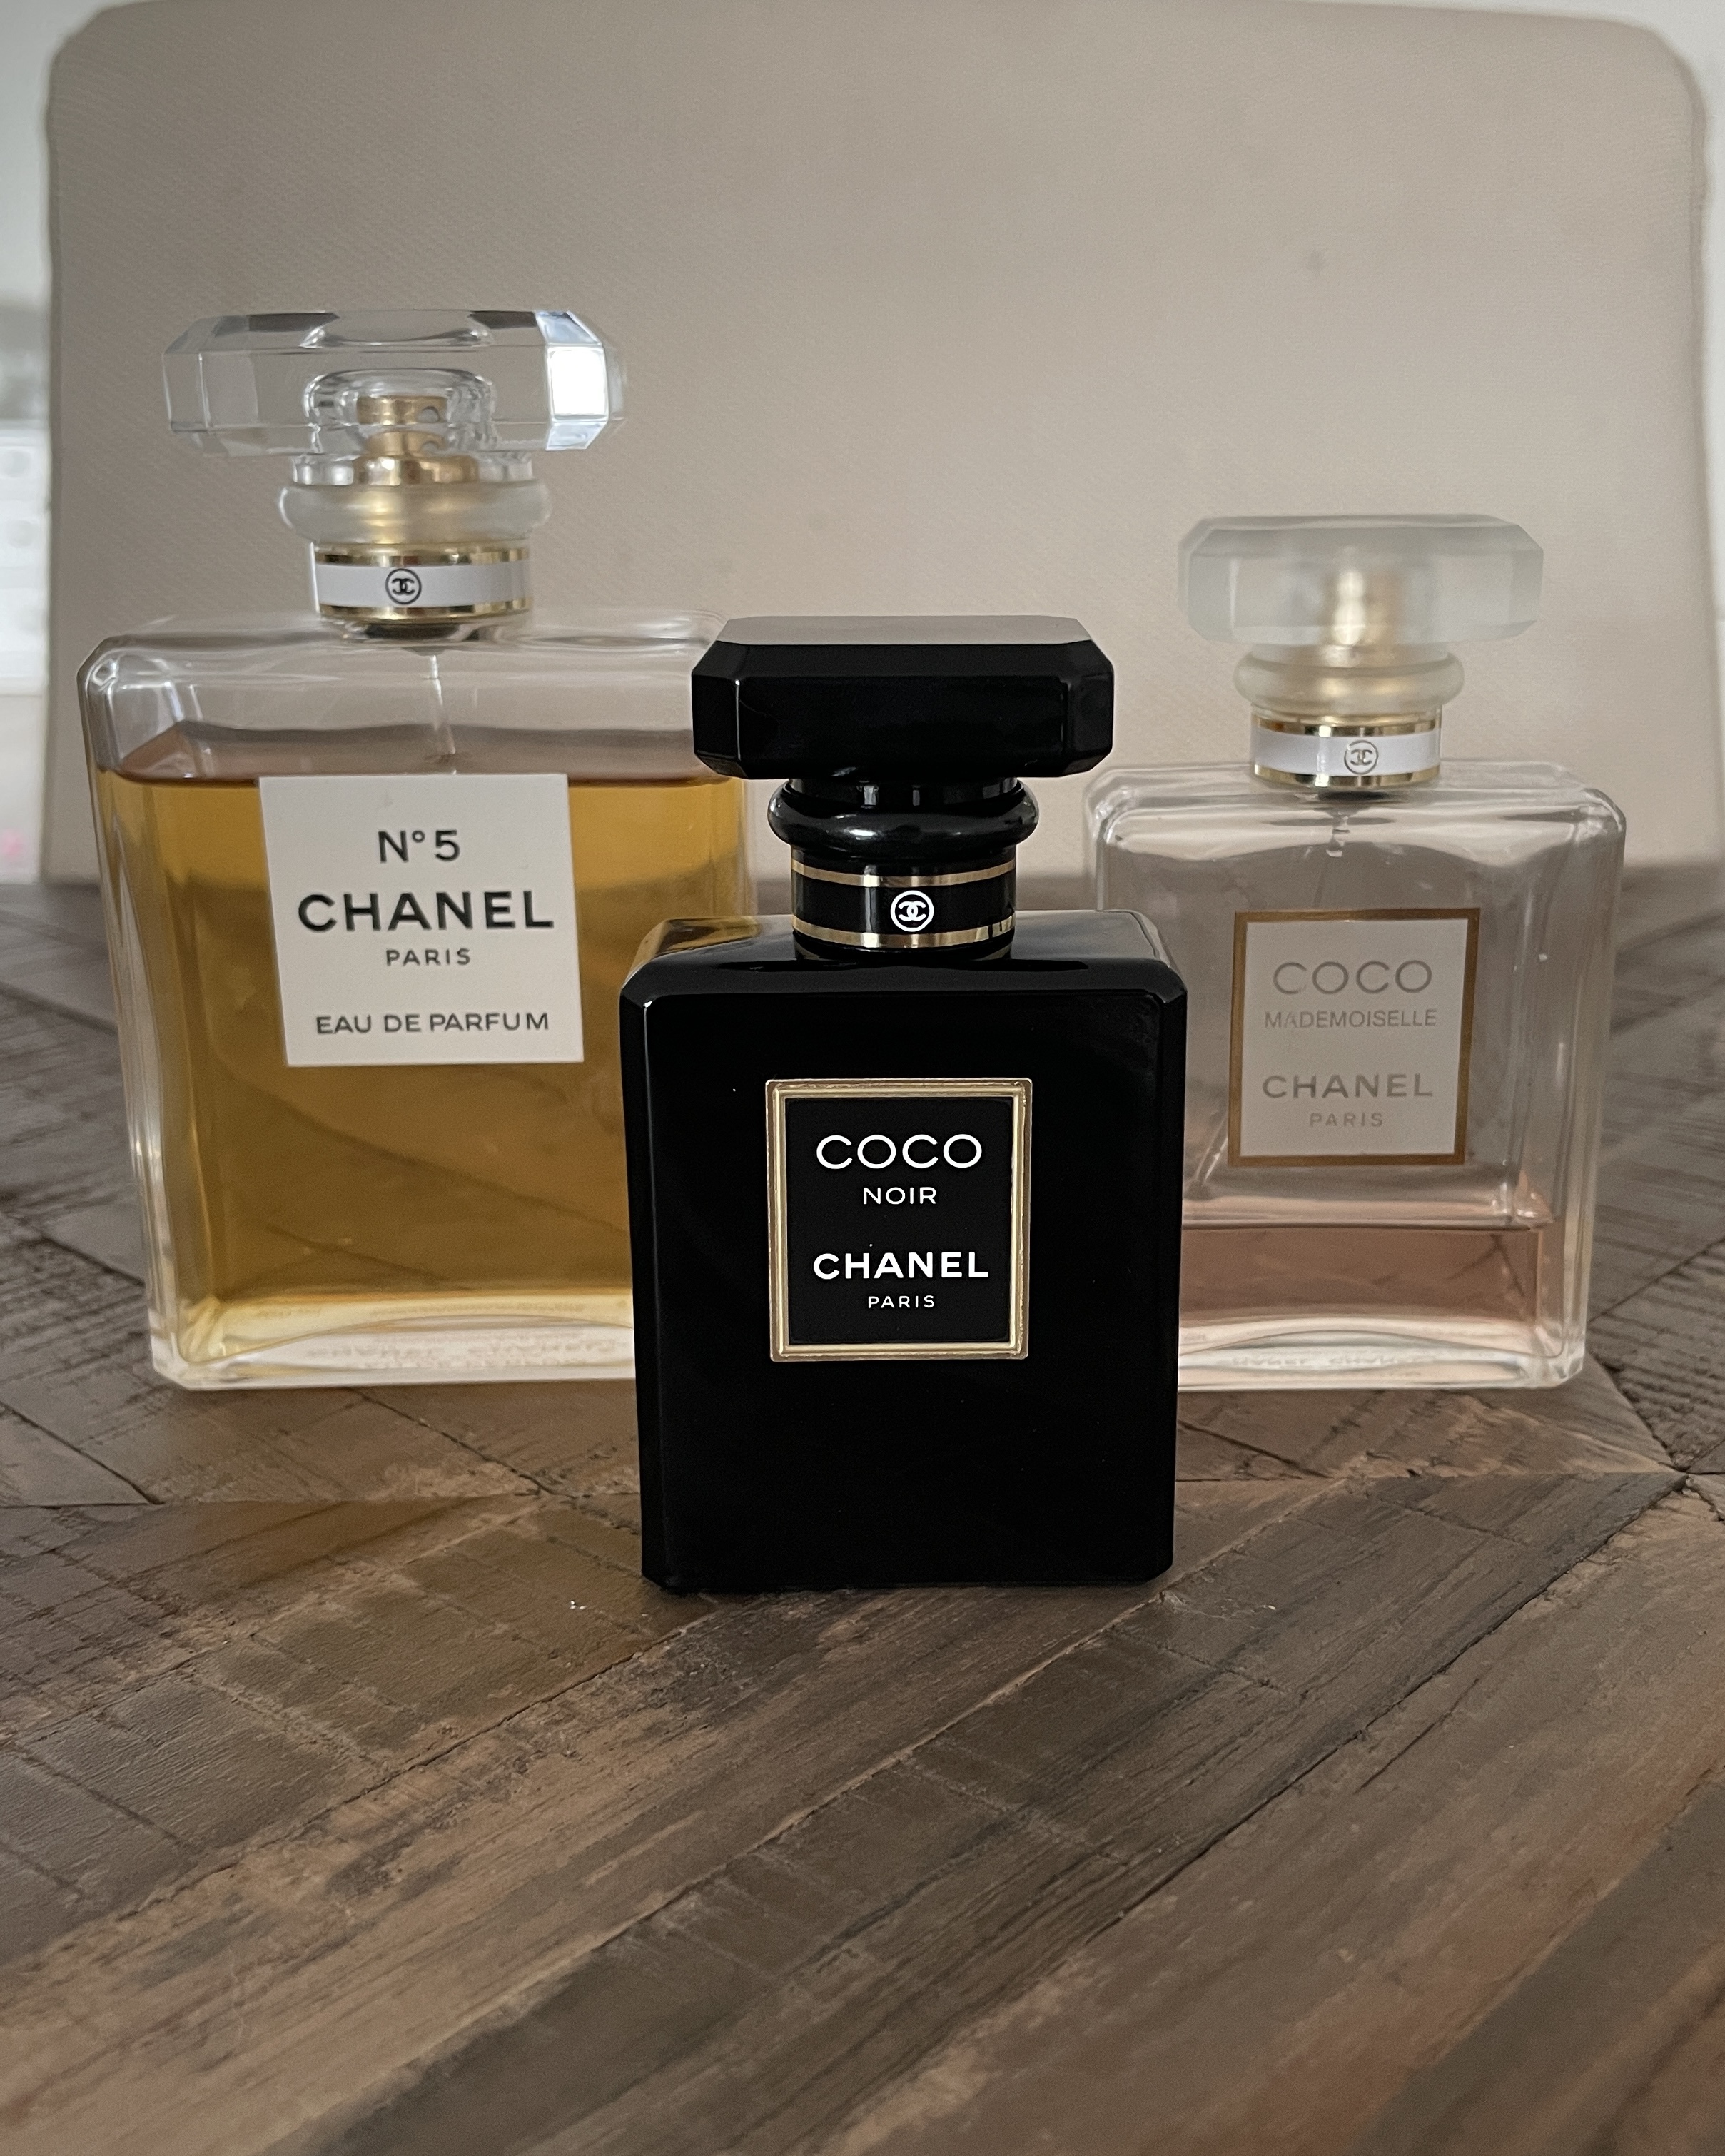 Coco Mademoiselle Parfum Chanel perfume  a fragrance for women